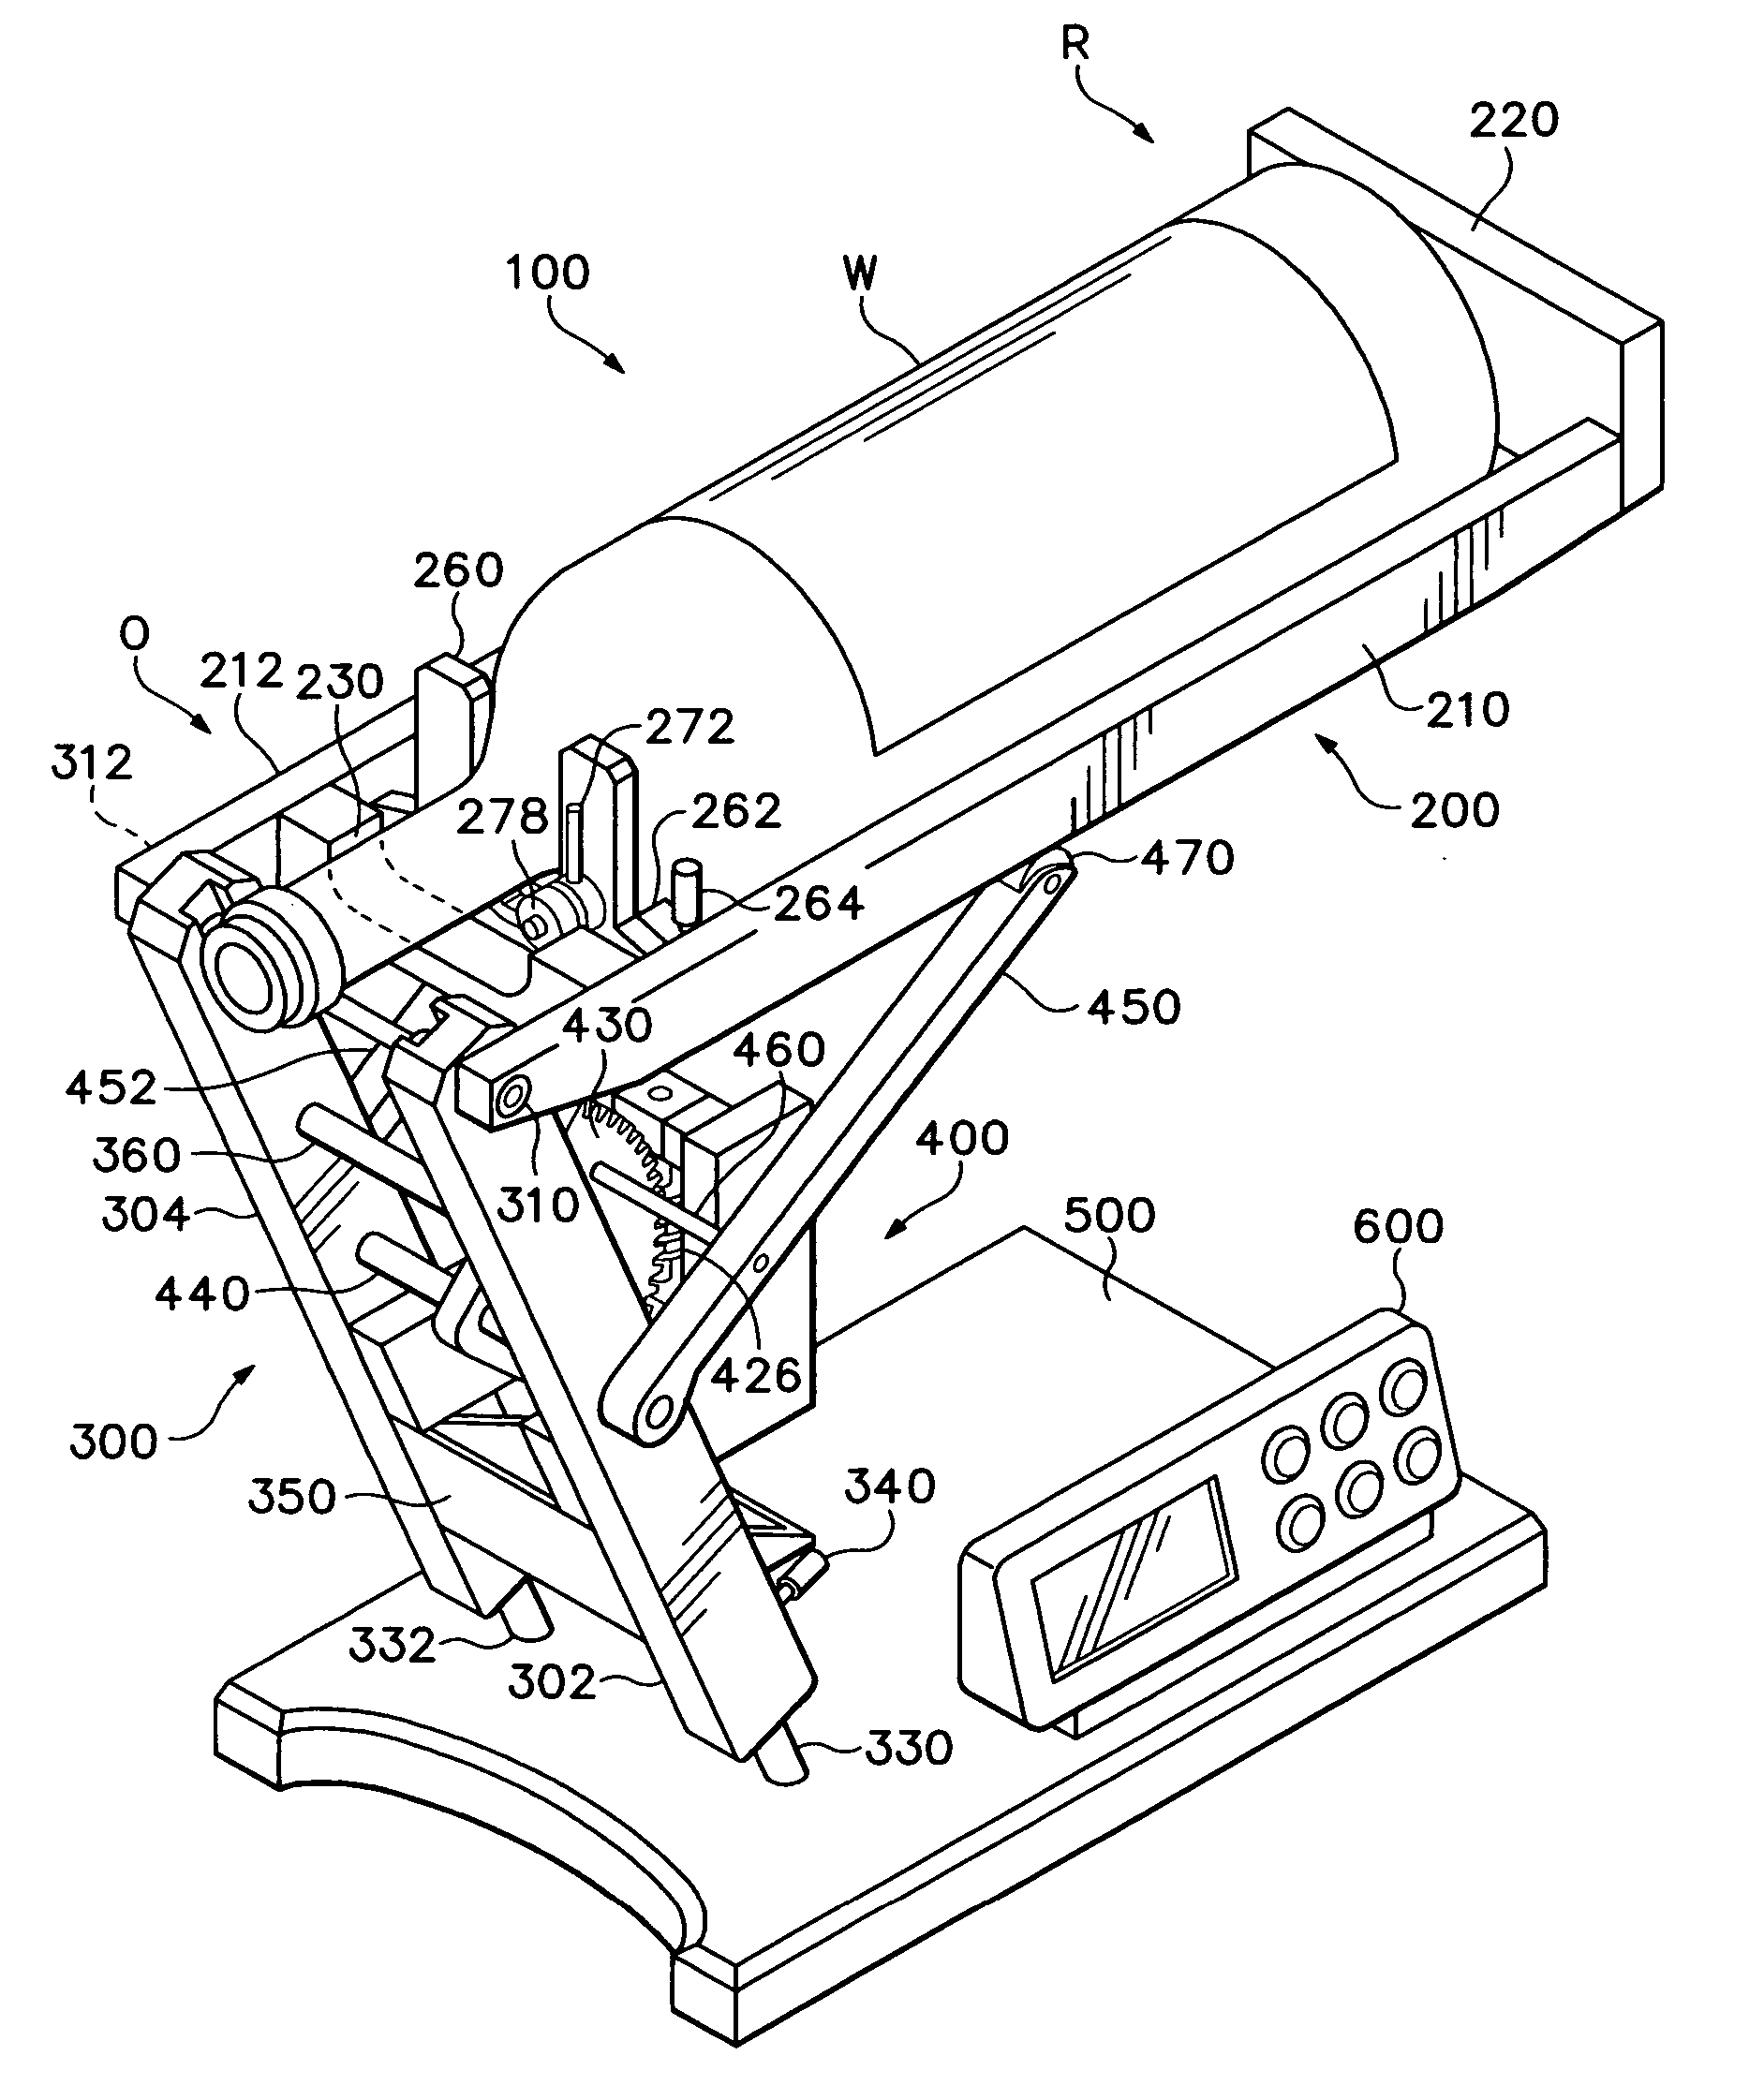 Wine decanting appliance and method for decanting